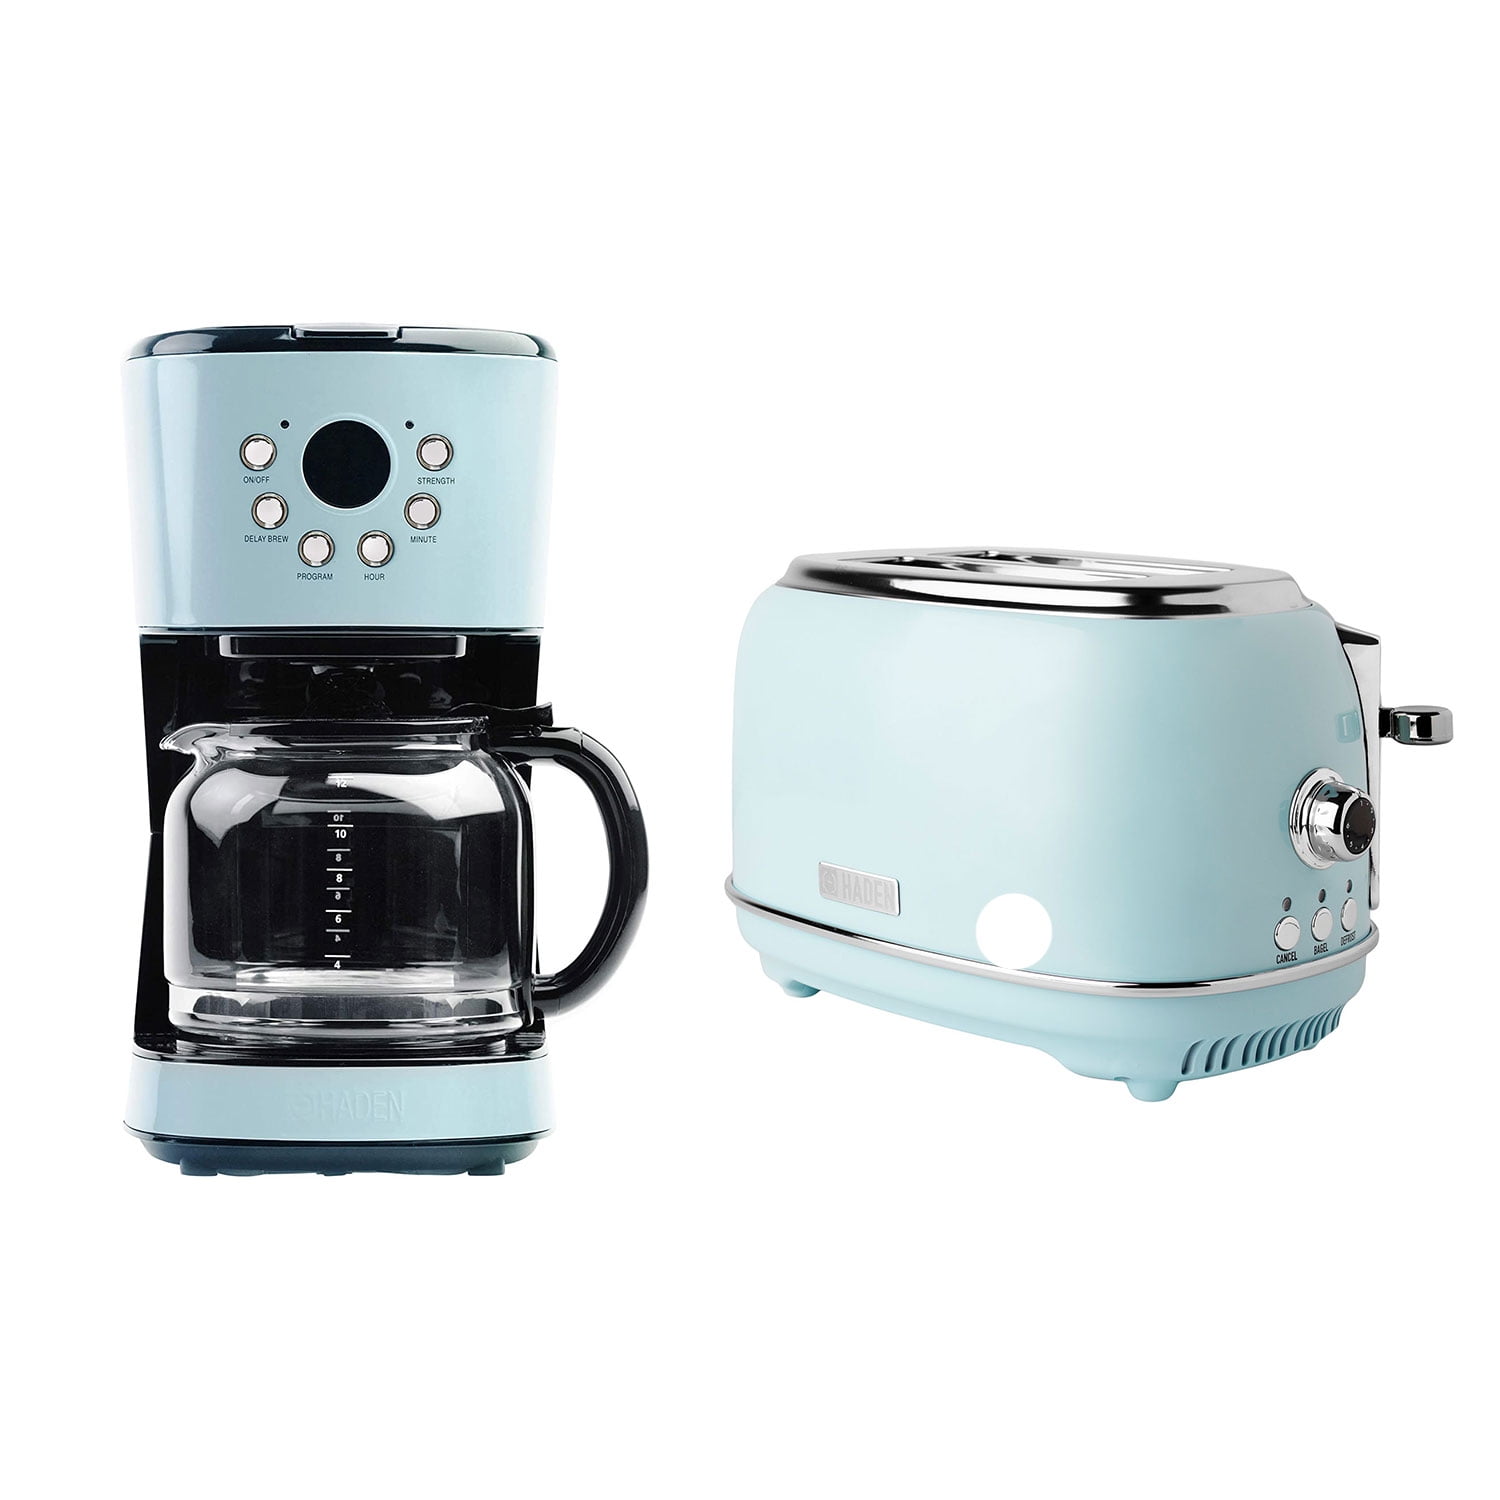 Haden Heritage 12 Cup Programmable Coffee Maker with Toaster, Turquoise